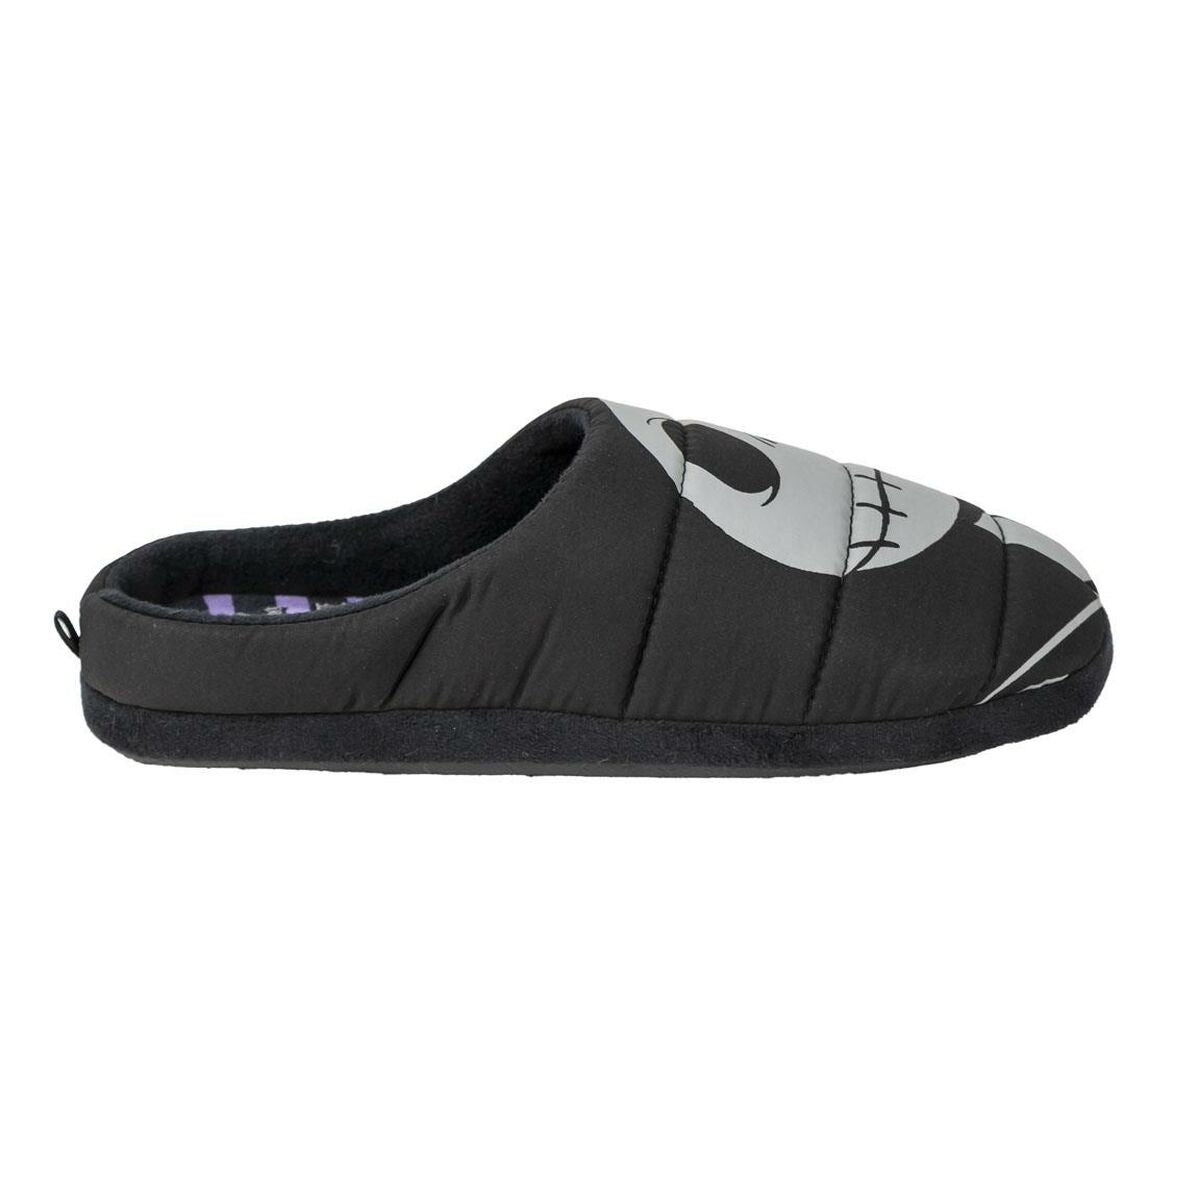 House Slippers The Nightmare Before Christmas Black